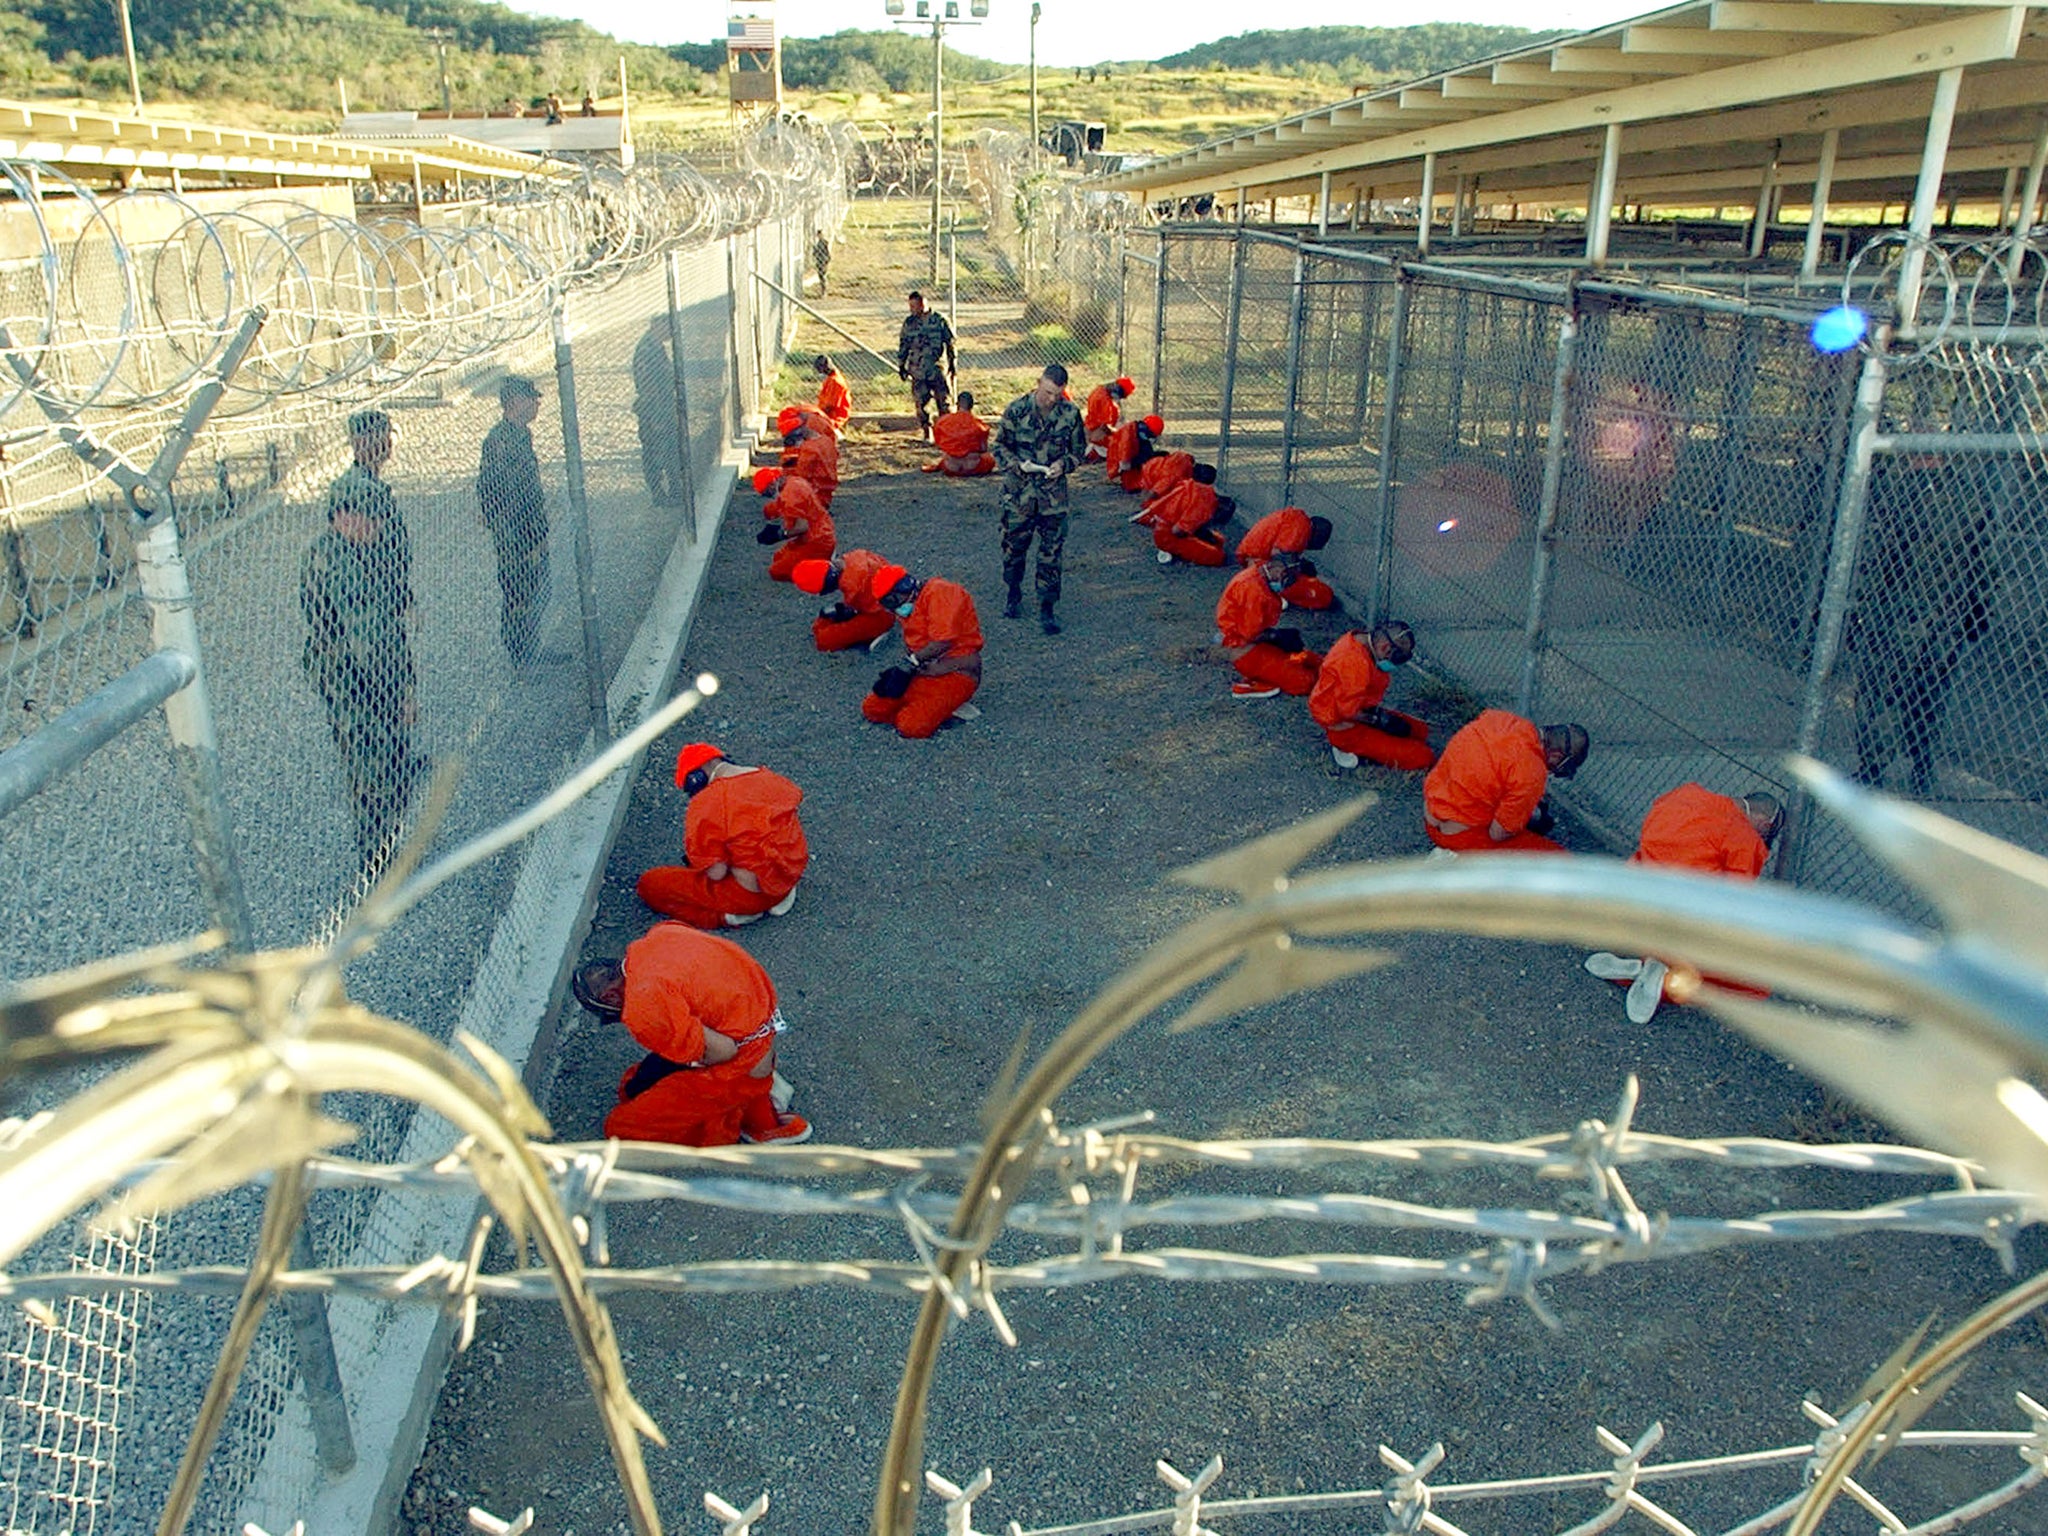 Sadly, many countries preach against torture but don't practice what they preach